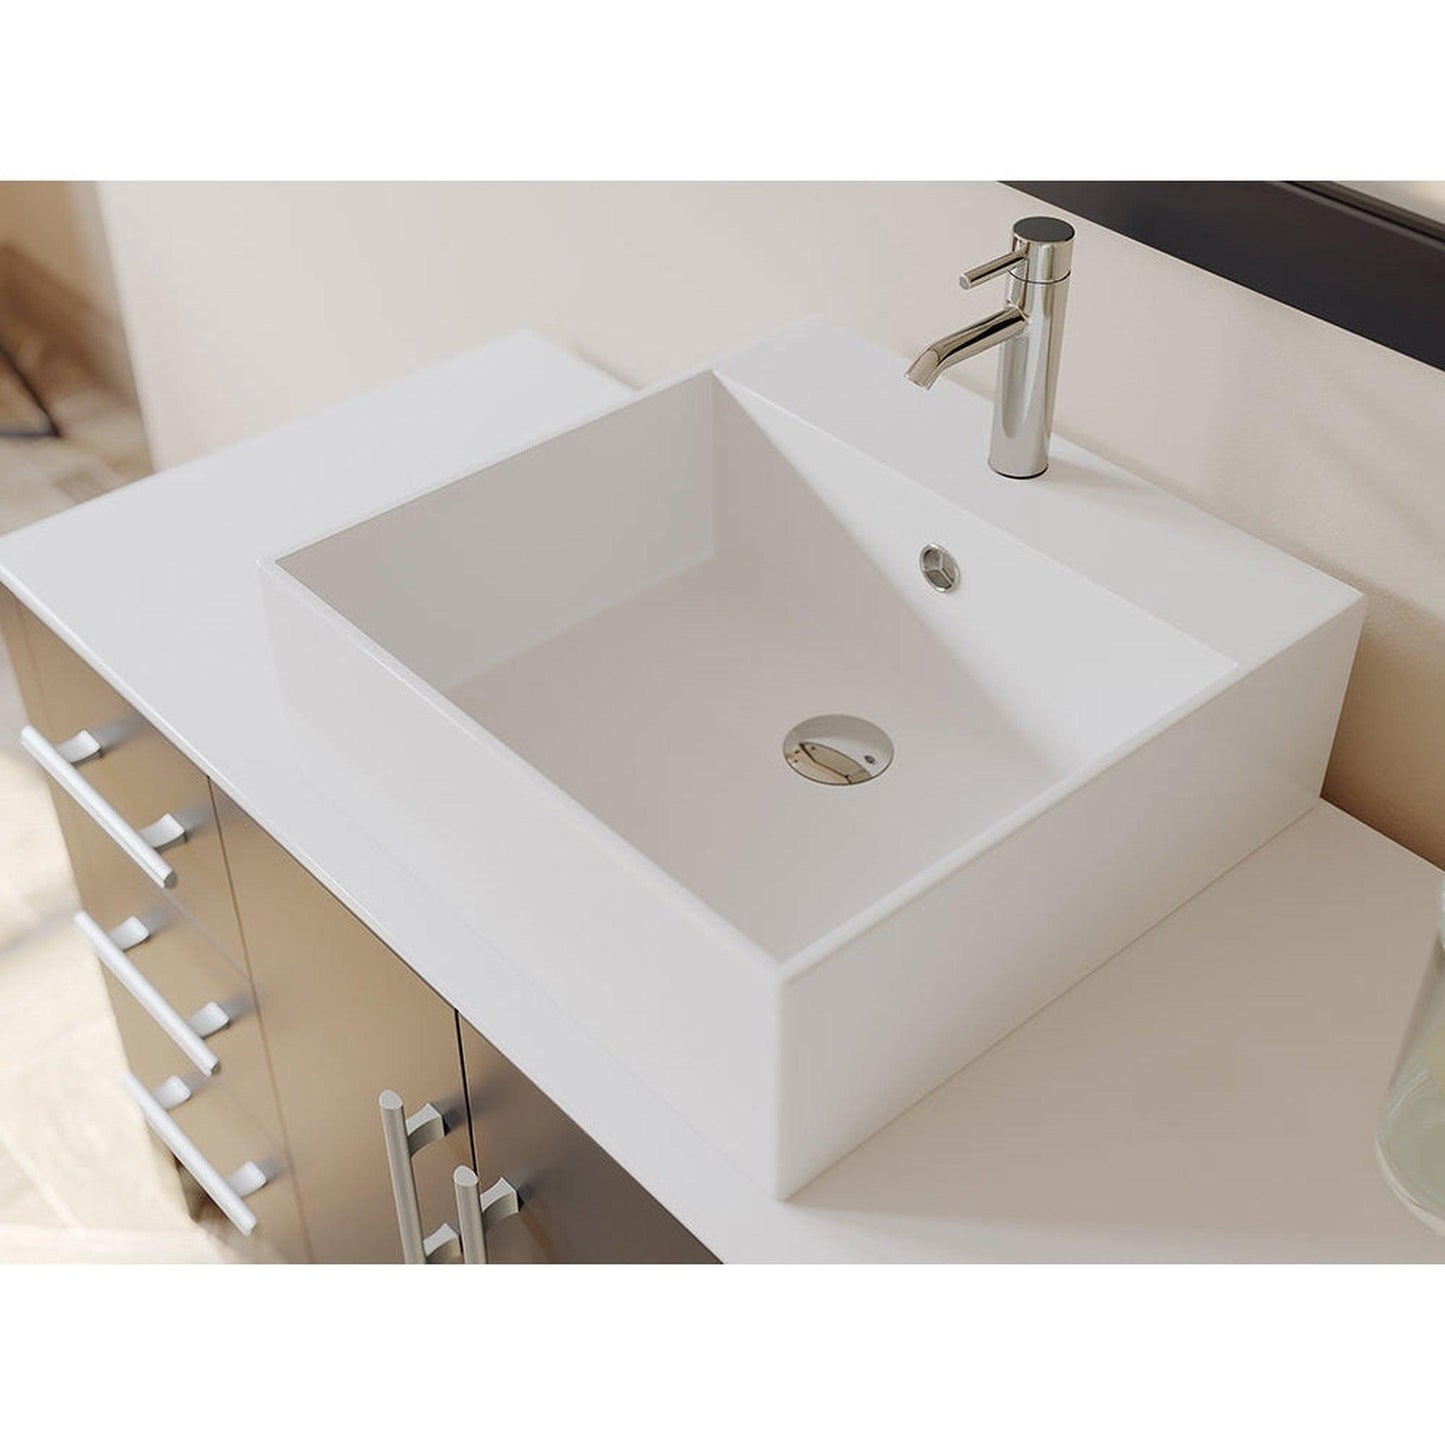 Cambridge Plumbing 48" Black Espresso Wood Single Vanity Set With Porcelain Square Vessel Sink With Faucet Hole And Polished Chrome Plumbing Finish